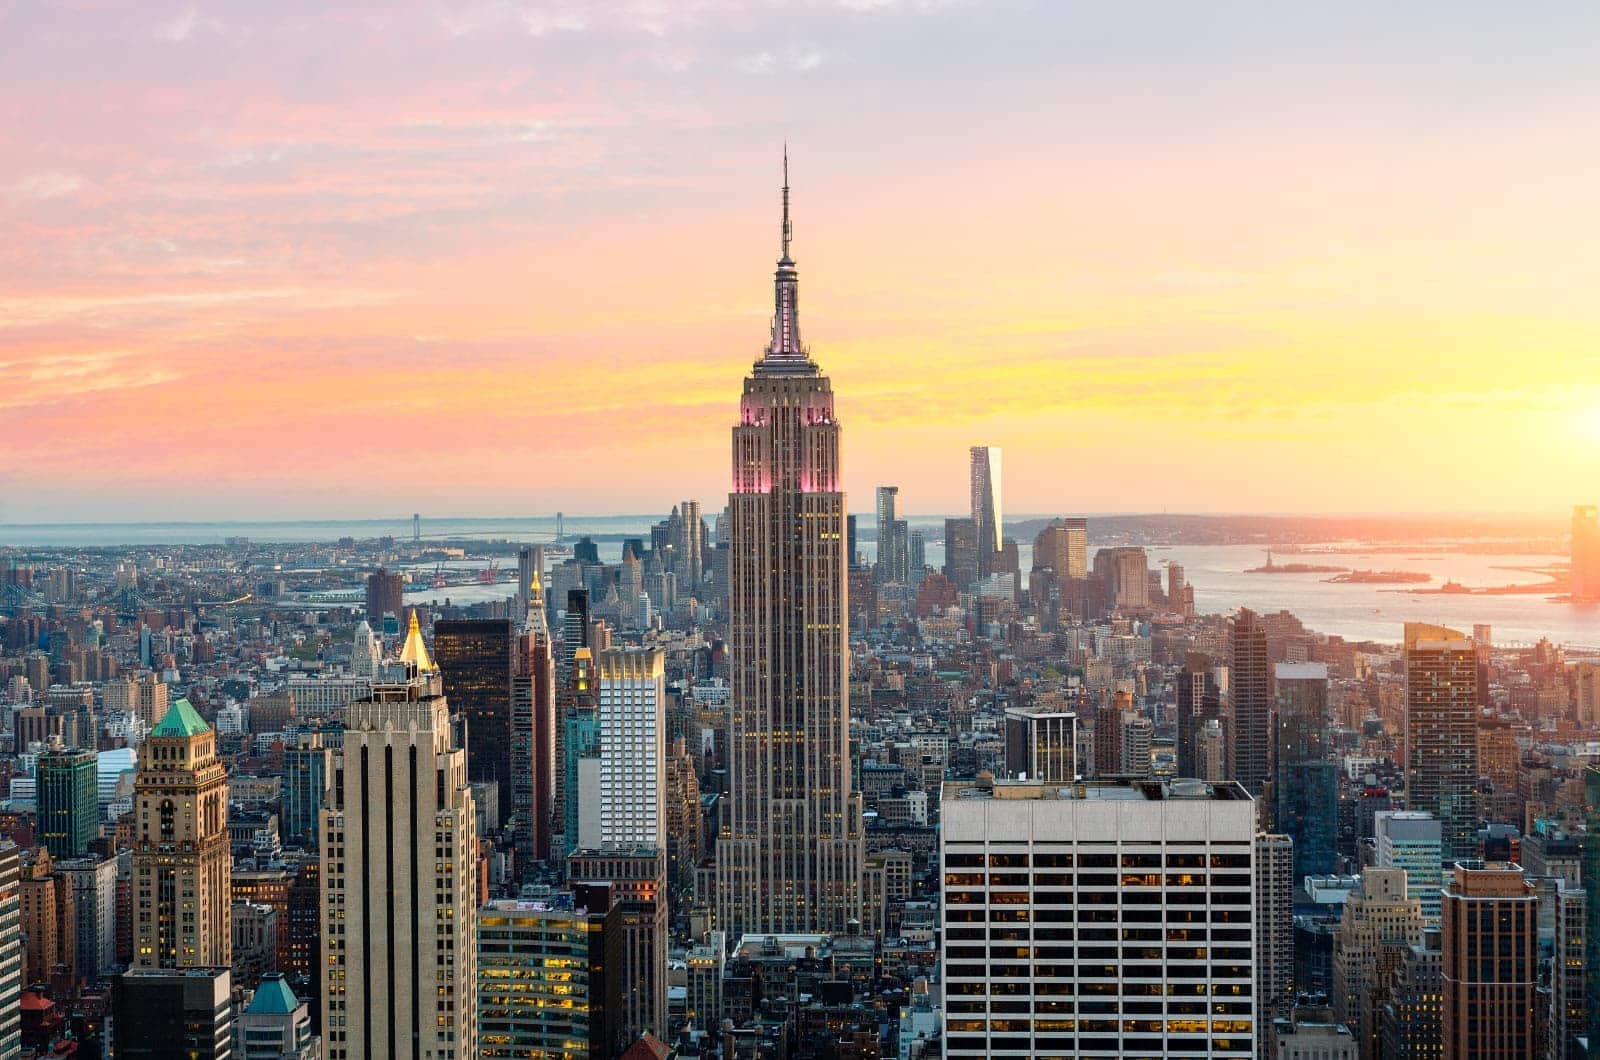 Aerial view of the Empire State Building at sunset